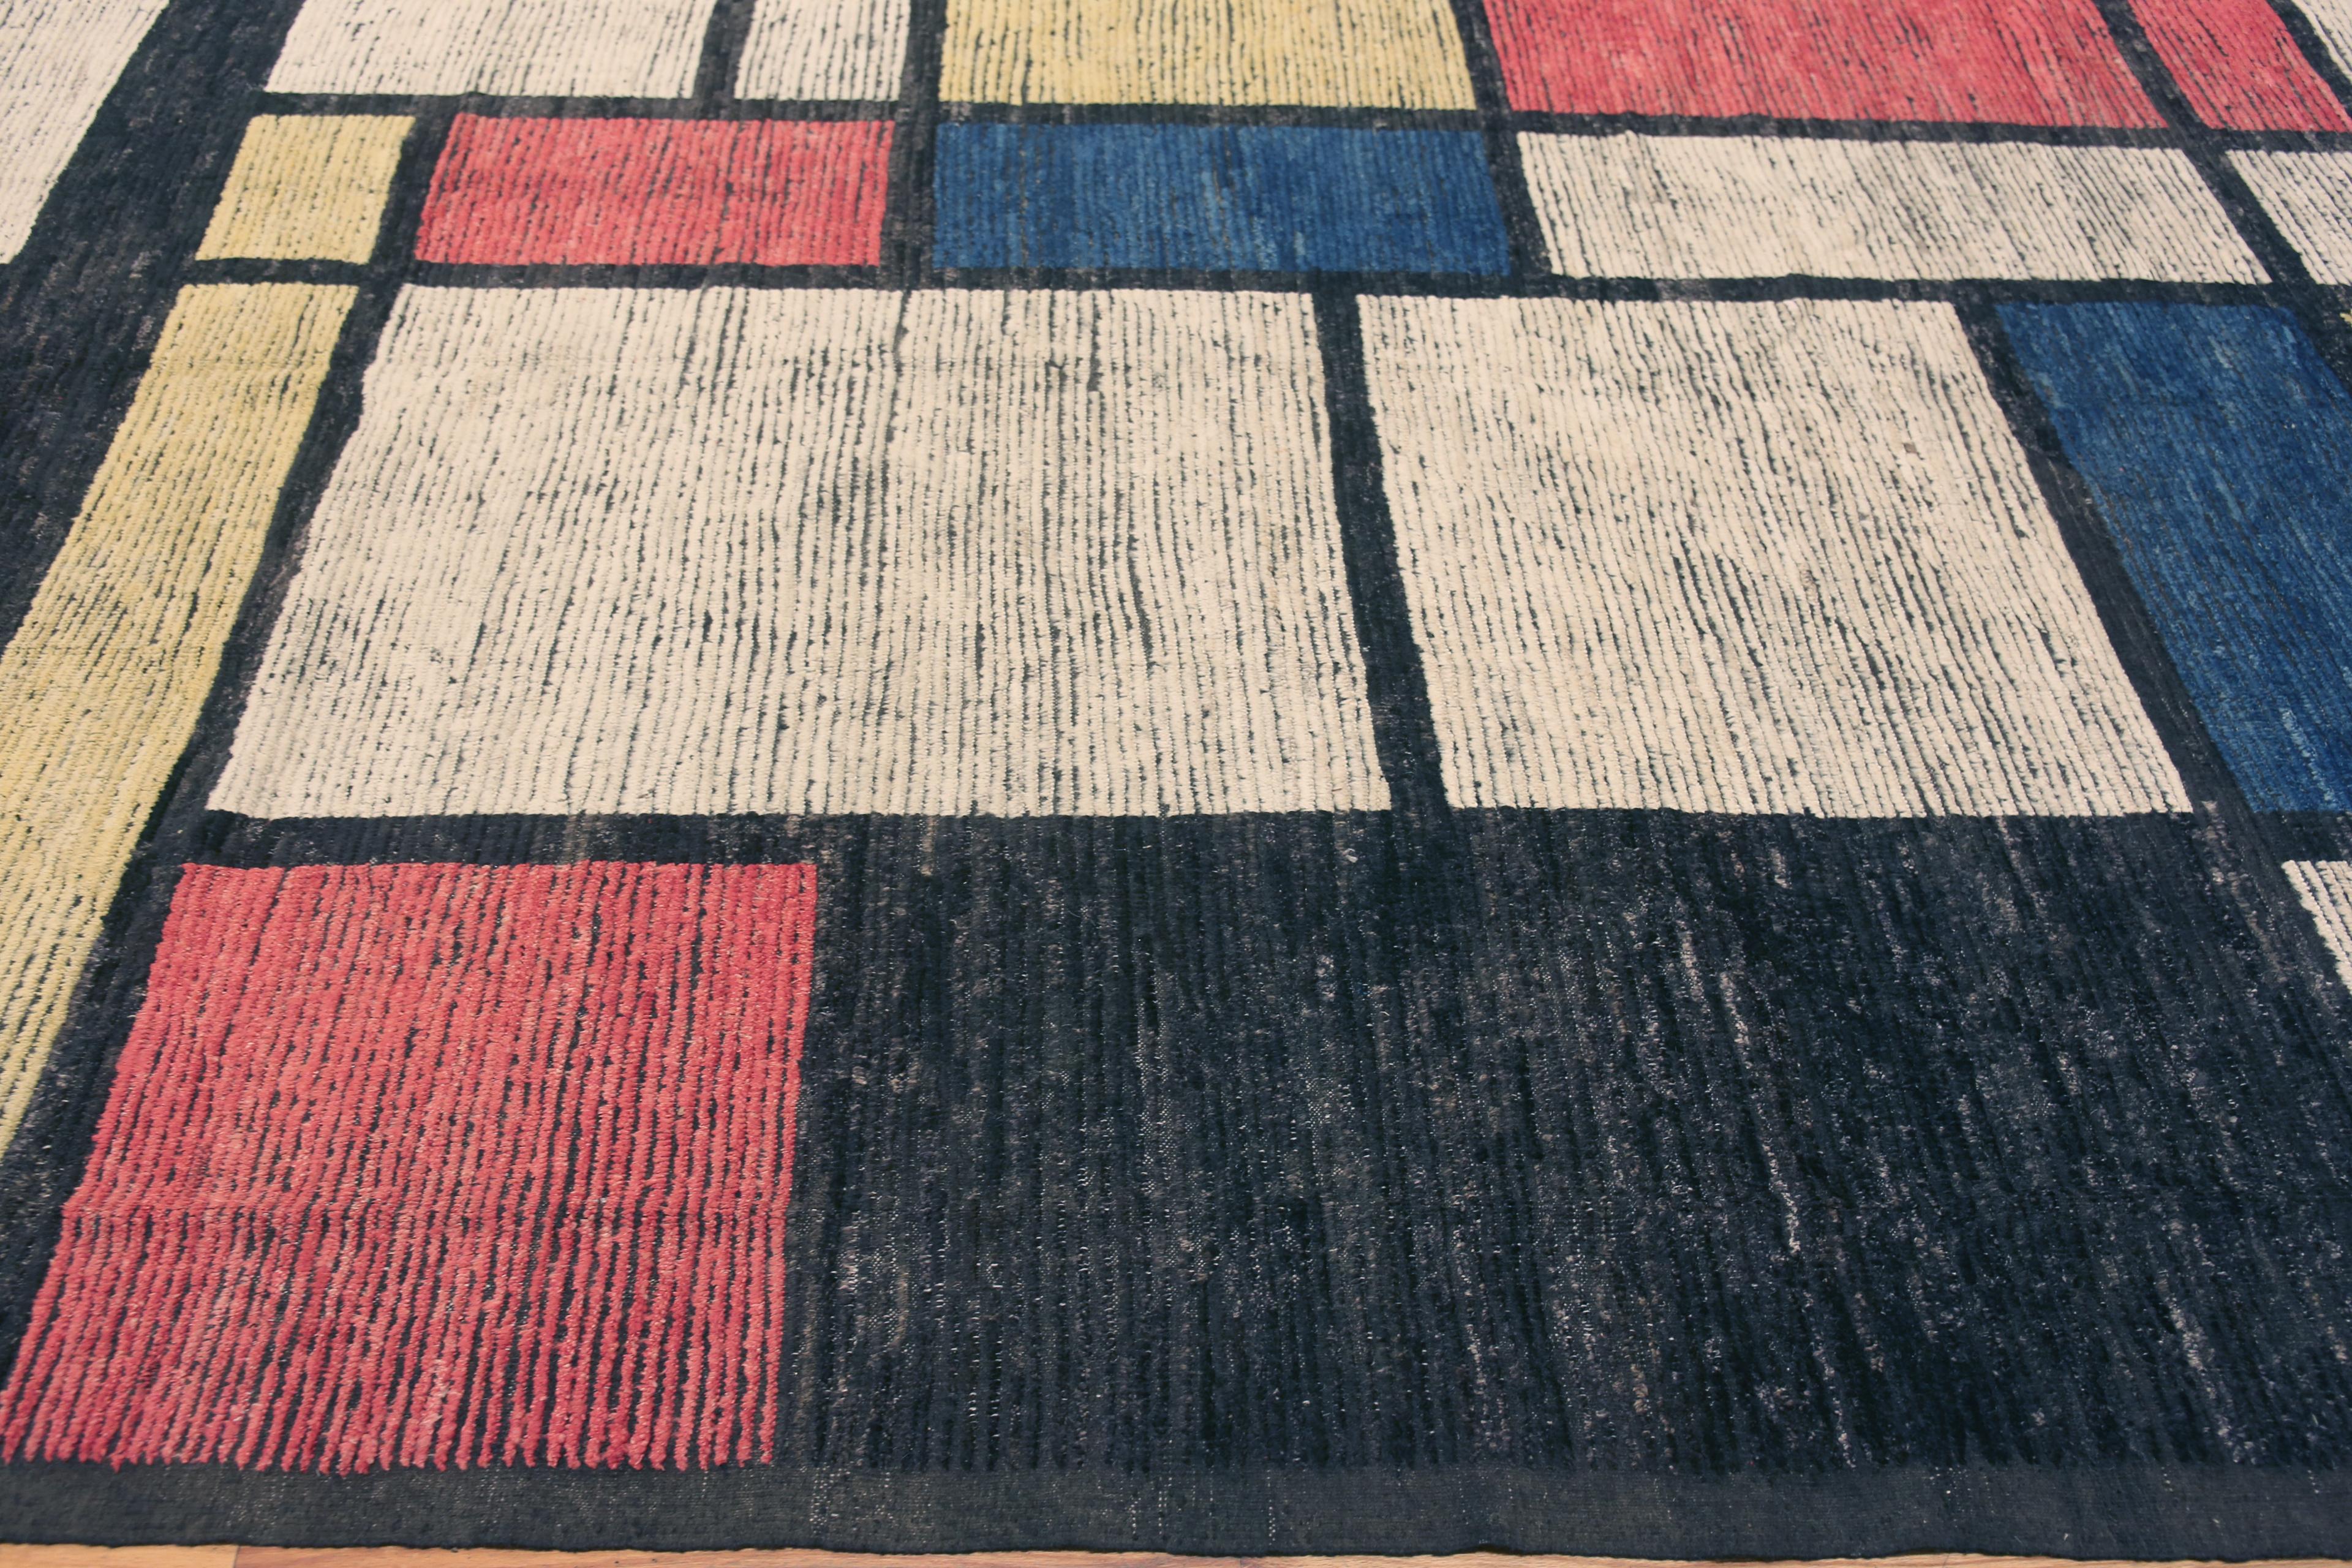 An Amazing Contemporary Artistic Piet Mondrian Inspired Modern Art Area Rug, Country of origin: Central Asia, Circa date: Modern Rugs